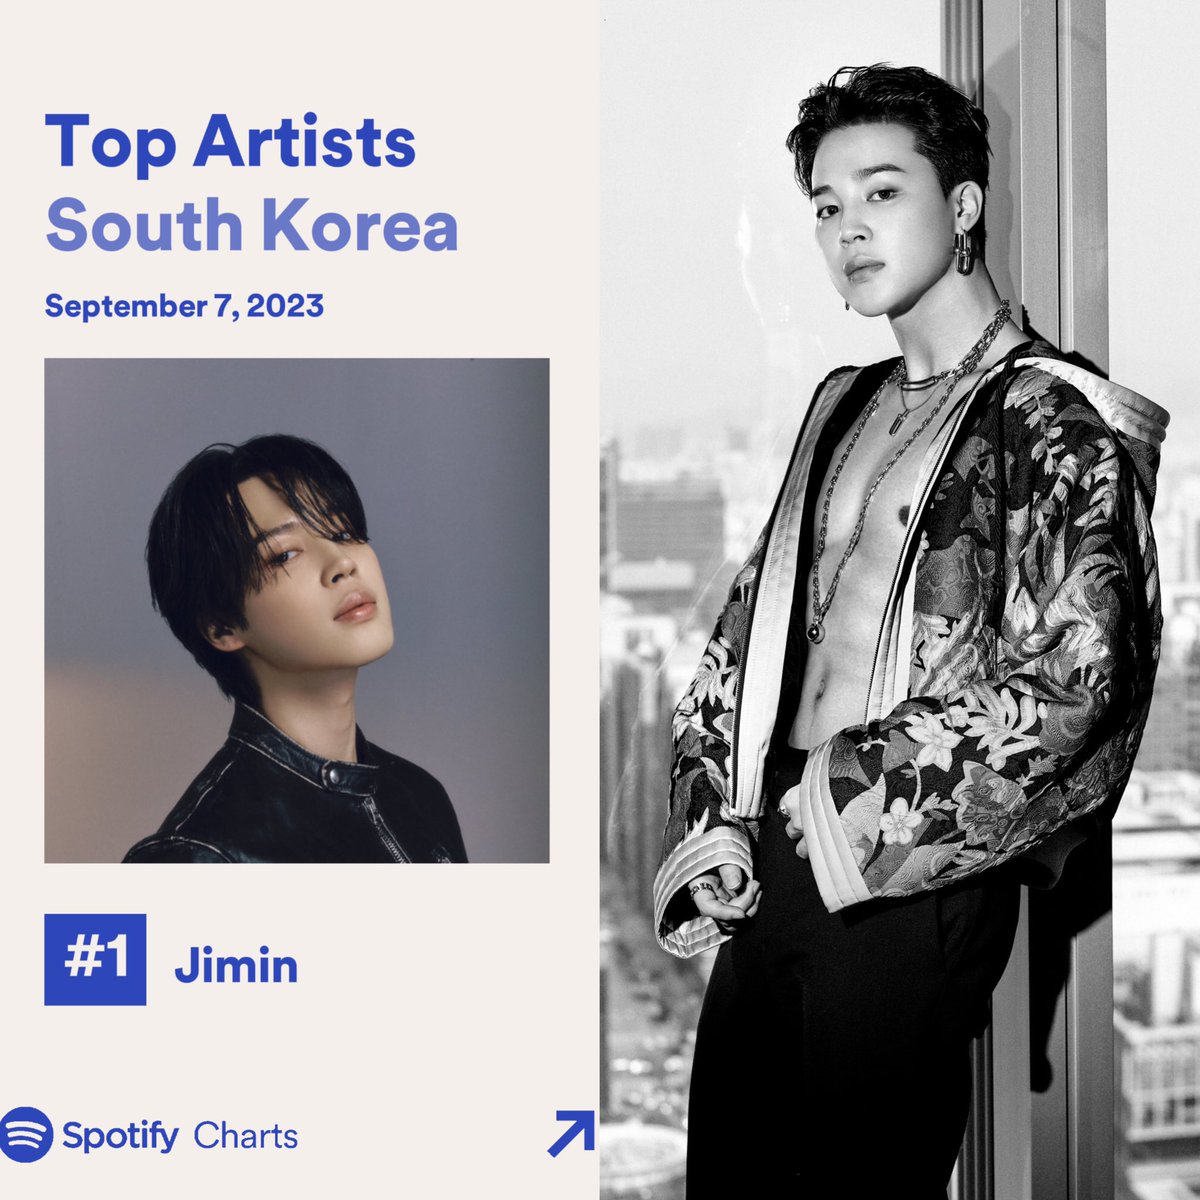 Jimin remains at #1 on Spotify Daily Top Artists South Korea on September 7, 2023 🇰🇷 He extends his record as the longest-charting soloist at #1 on the chart—118 days. Congratulations, Jimin! 🥰